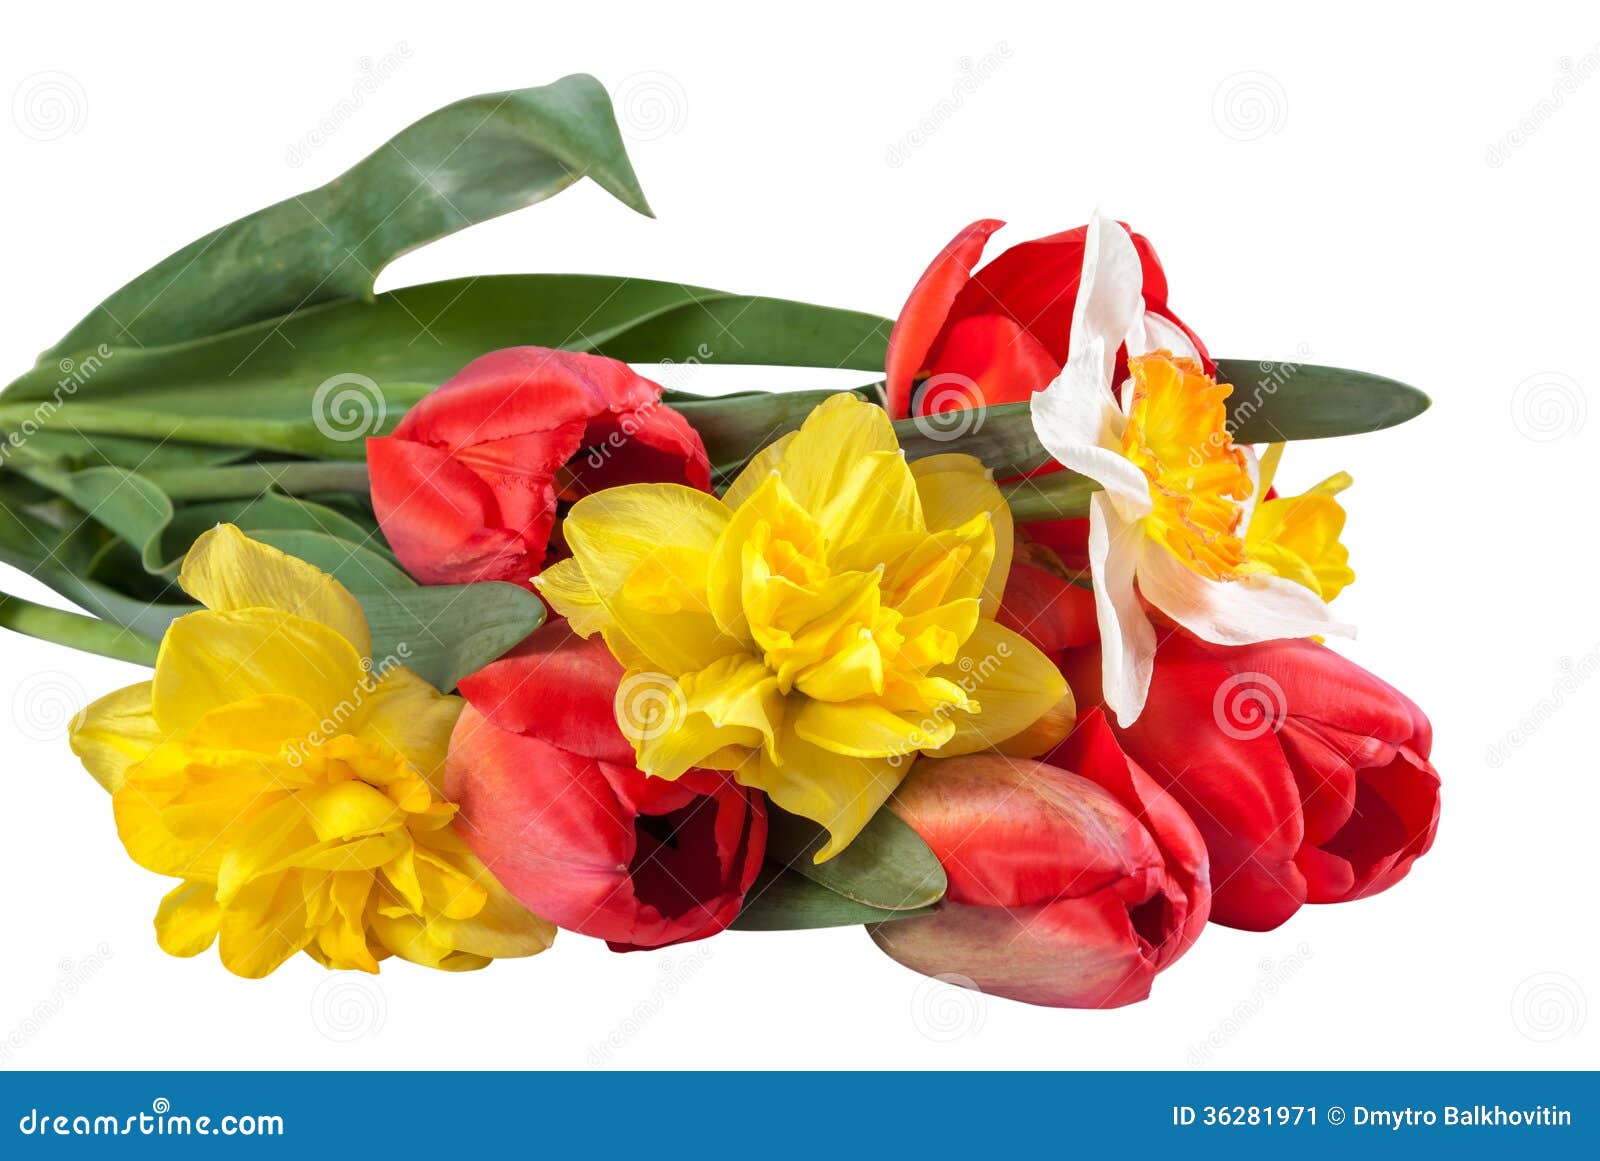 Narcissus and Red Tulips Flower Isolated Stock Image - Image of leaf ...